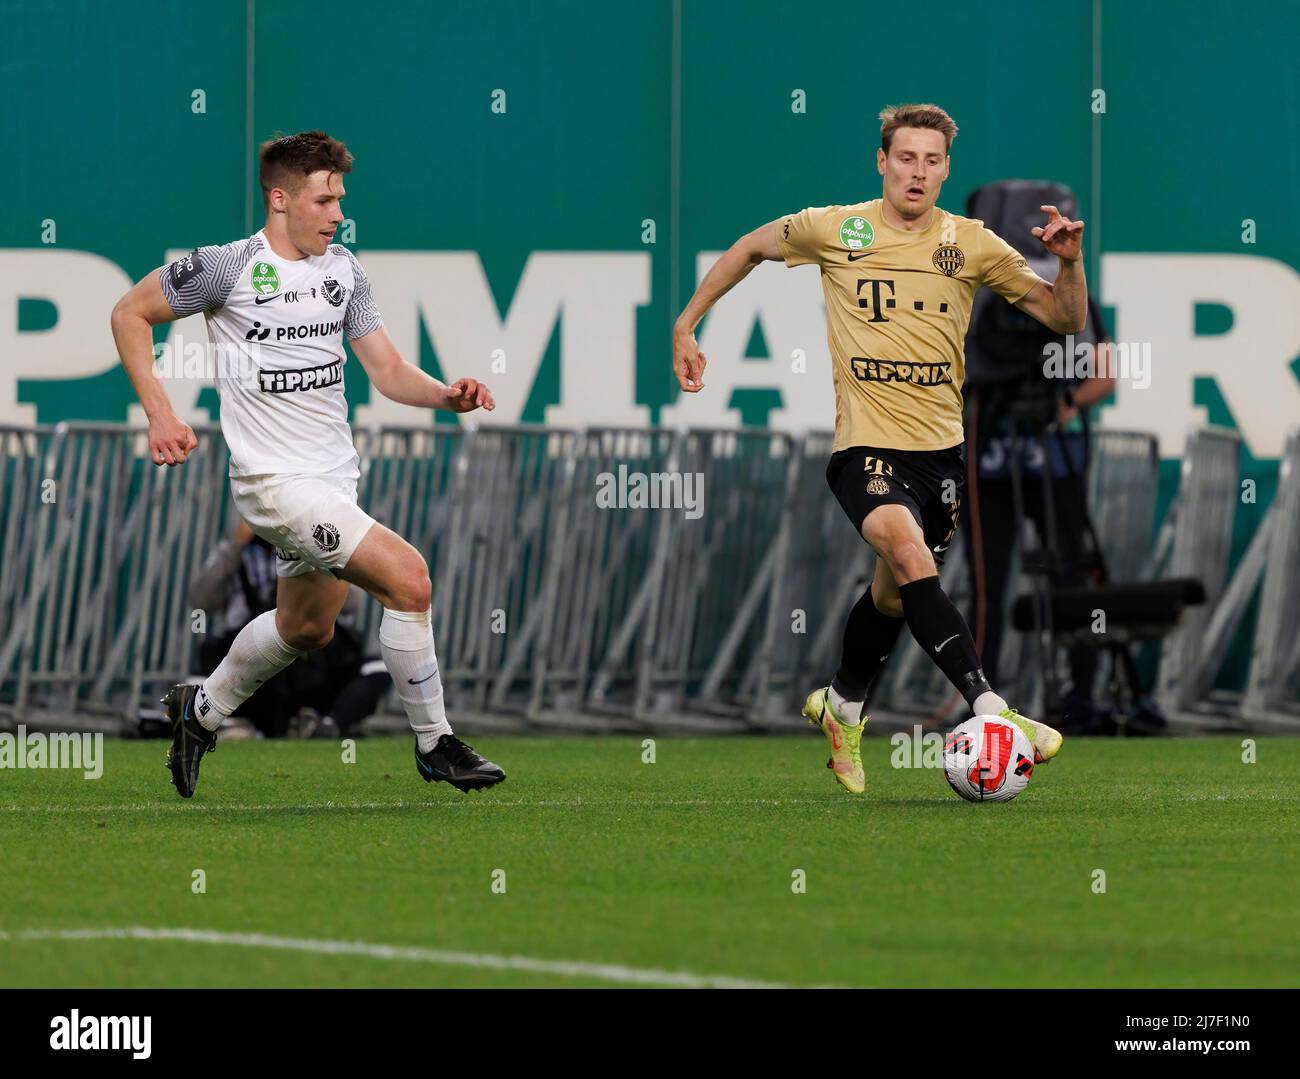 Hungary - Ferencvárosi TC Under 18 - Results, fixtures, squad, statistics,  photos, videos and news - Soccerway